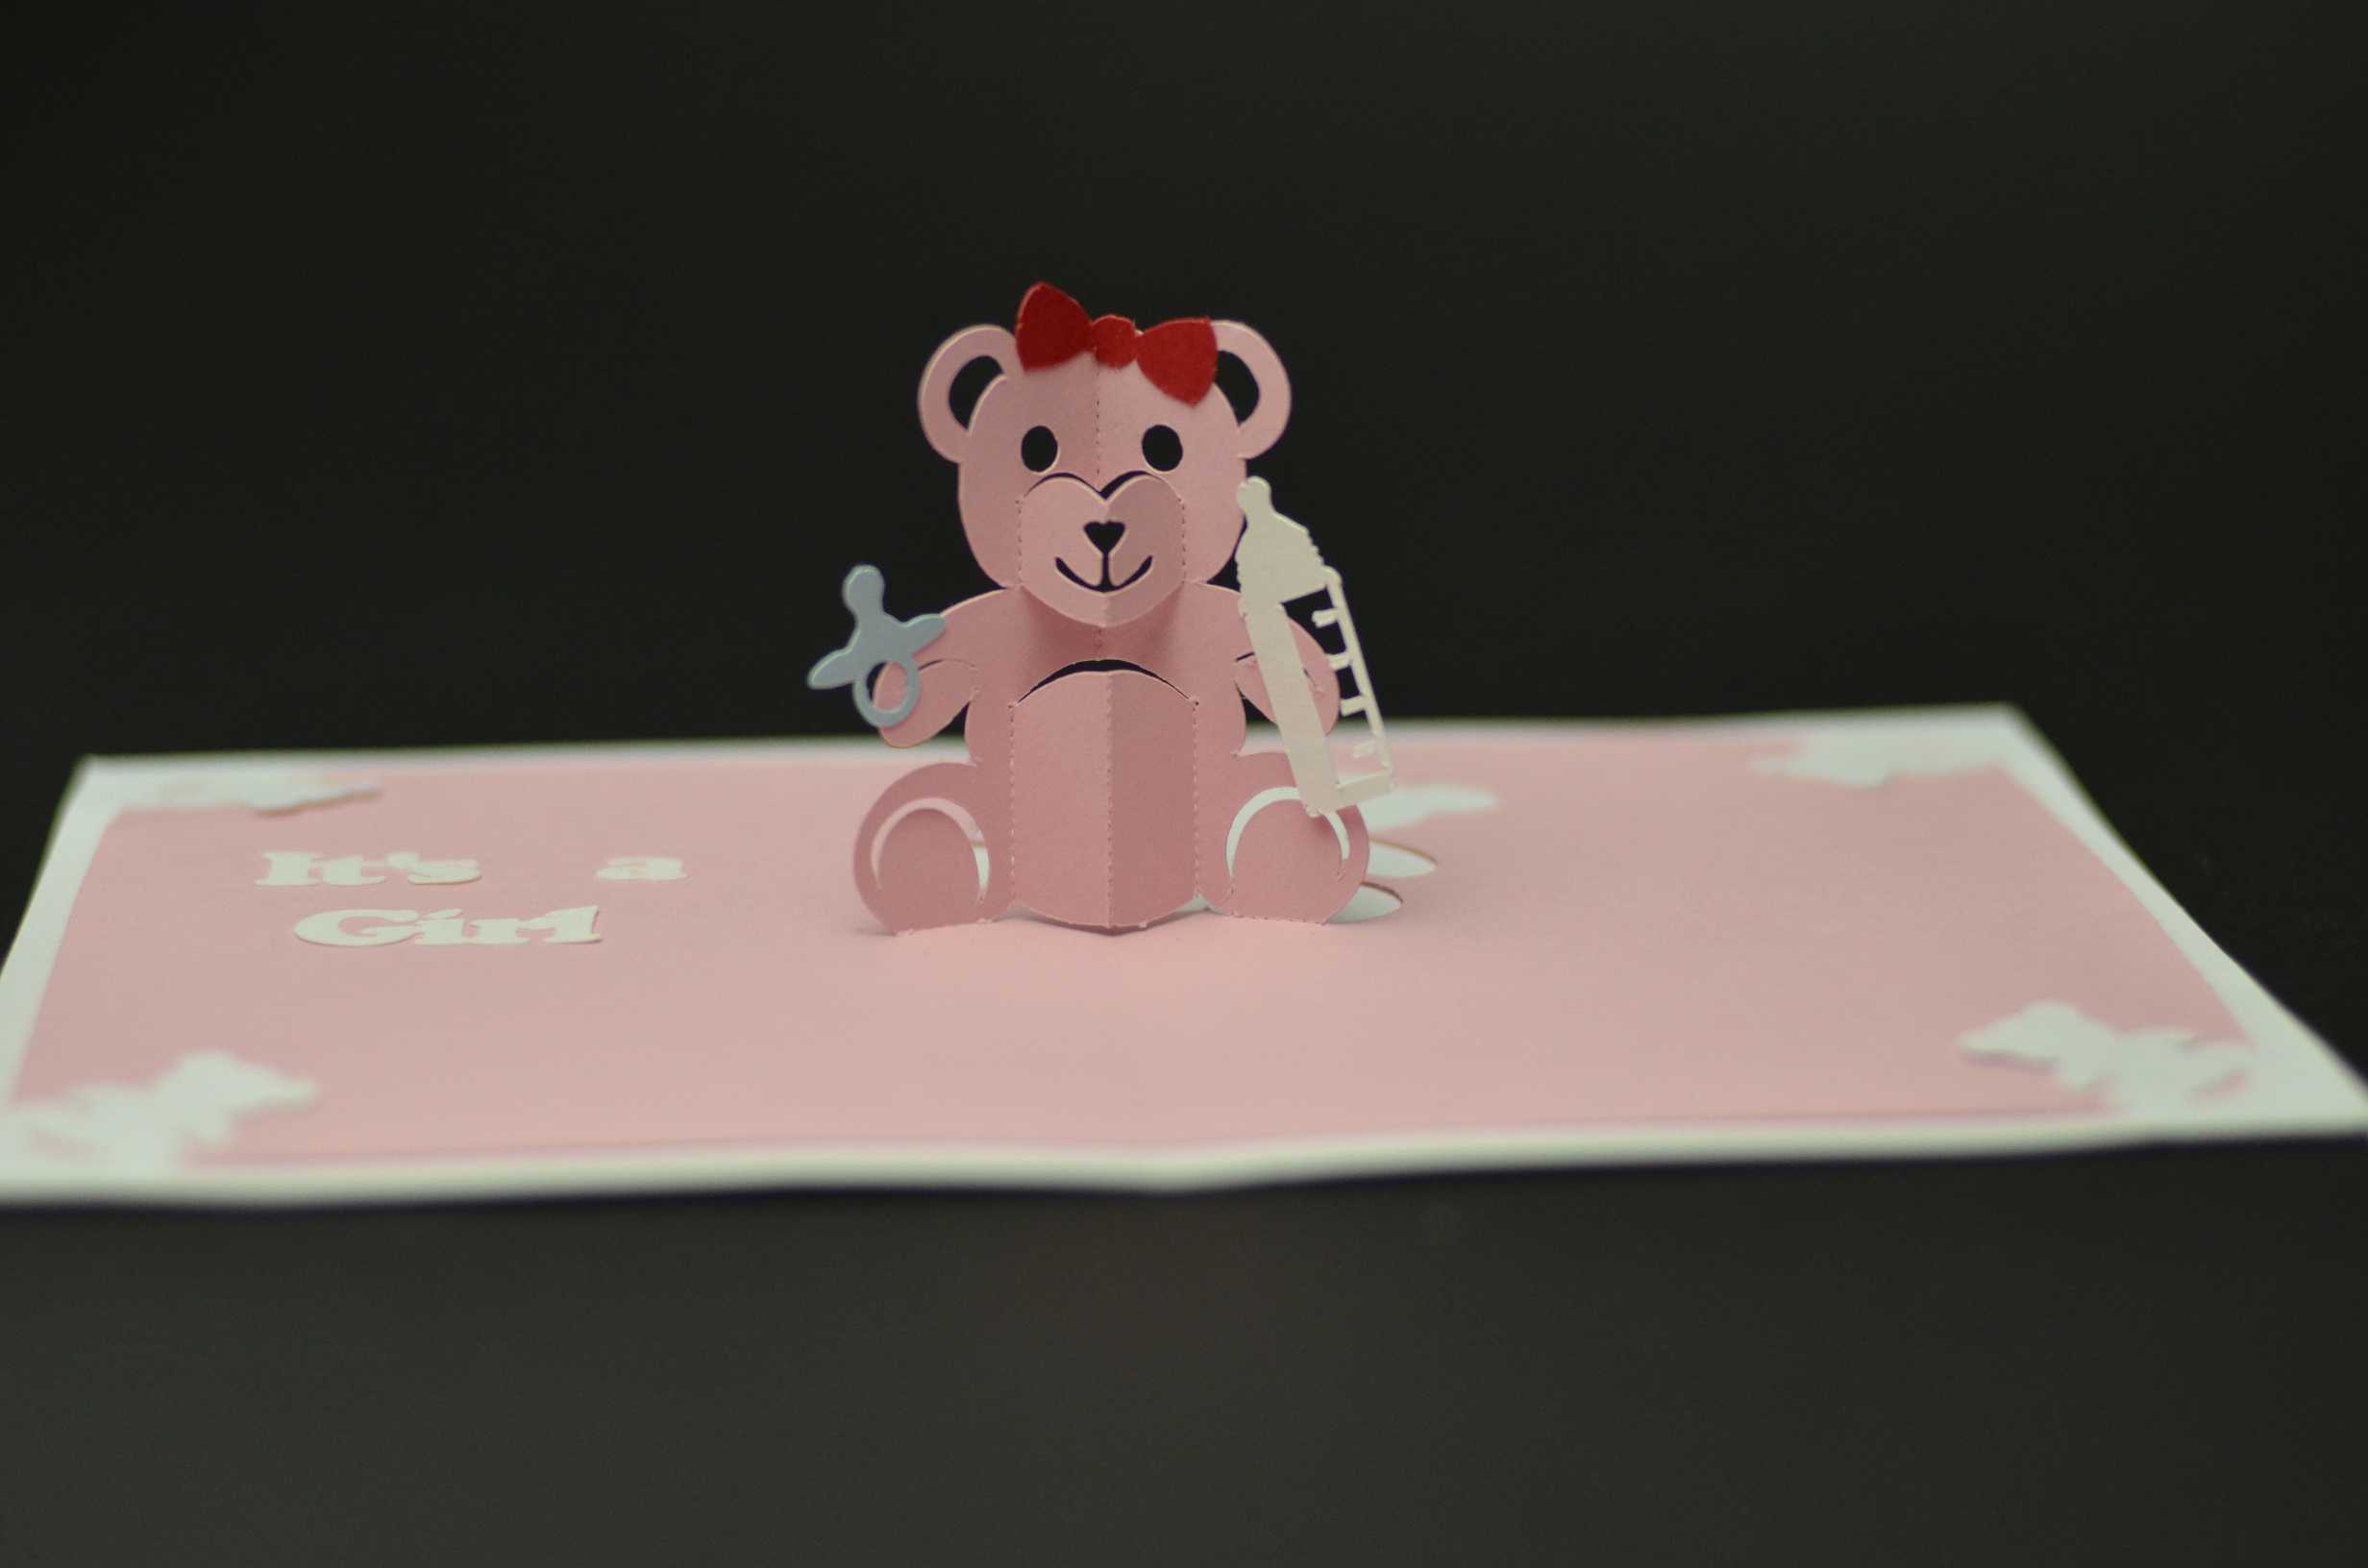 Teddy Bear Pop Up Card: Tutorial And Template - Creative Pop With Regard To Teddy Bear Pop Up Card Template Free